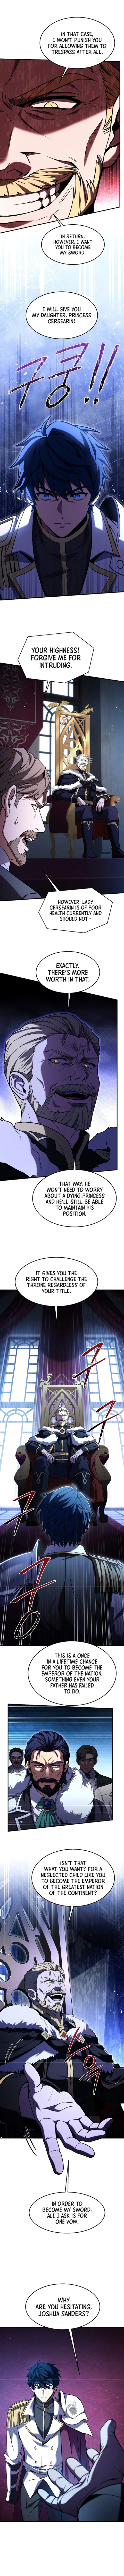 Return of the Legendary Spear Knight - Chapter 97 Page 3